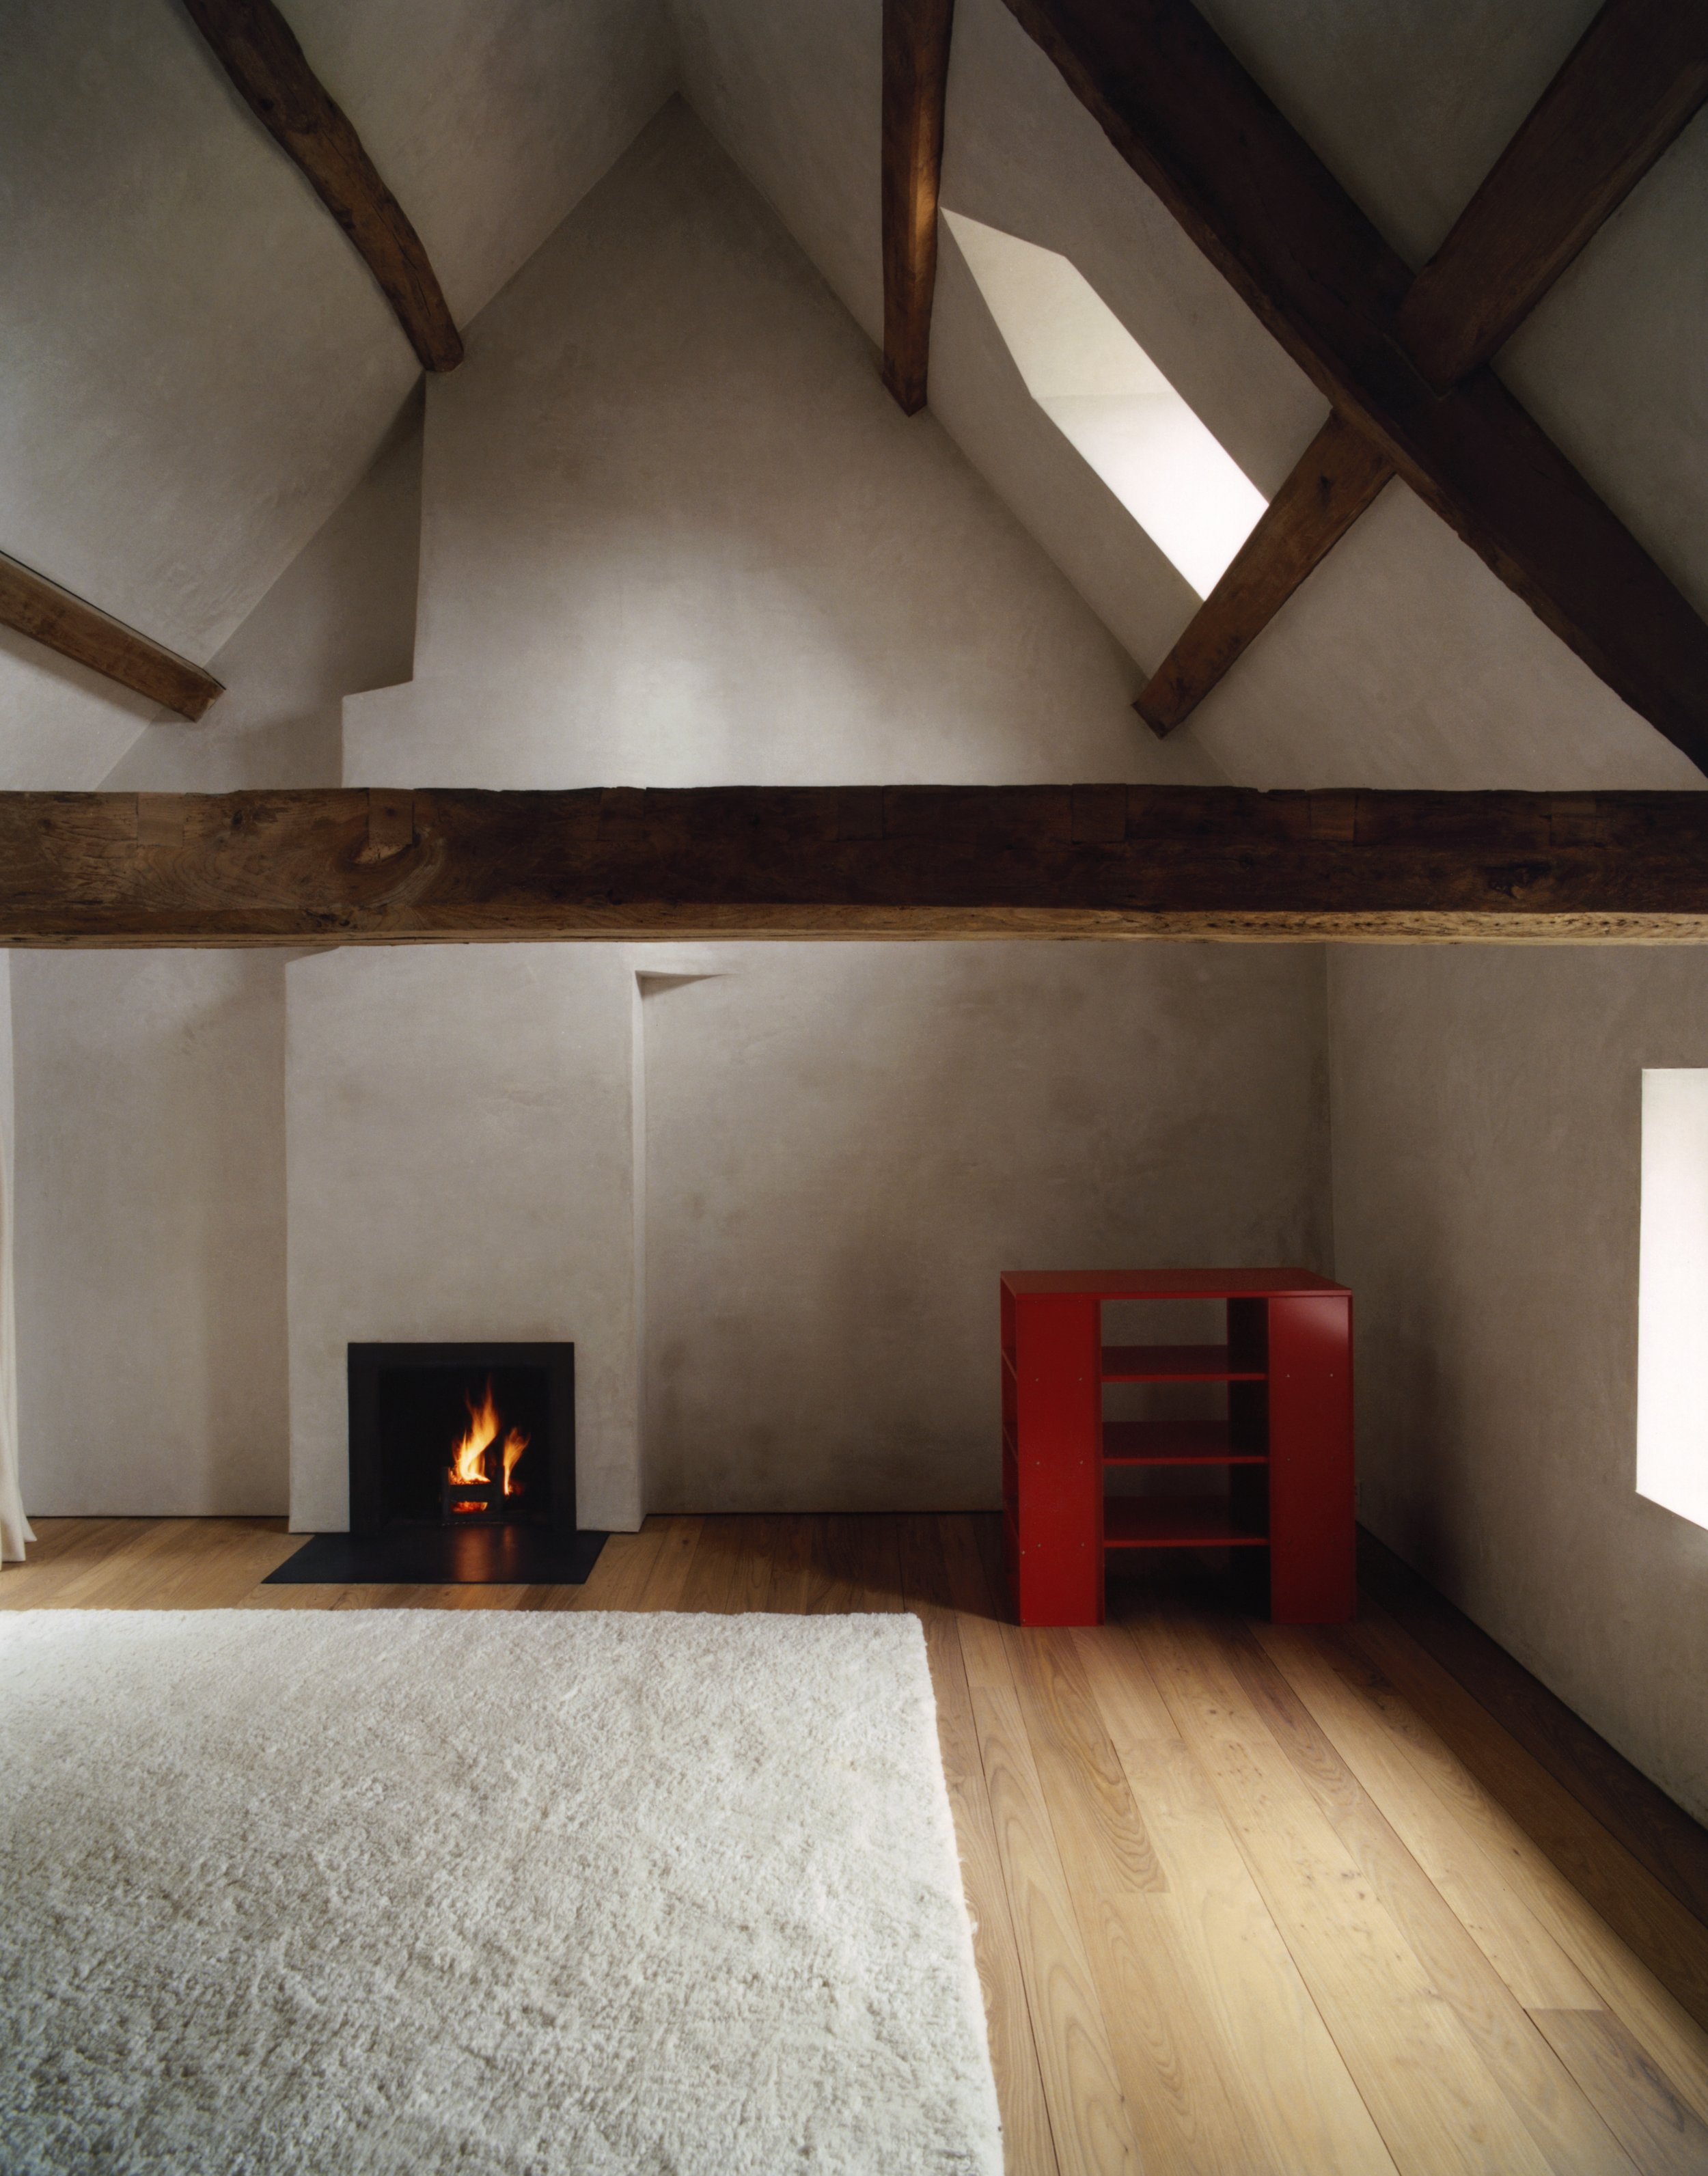  The home of architect John Pawson. The Cotswolds.  